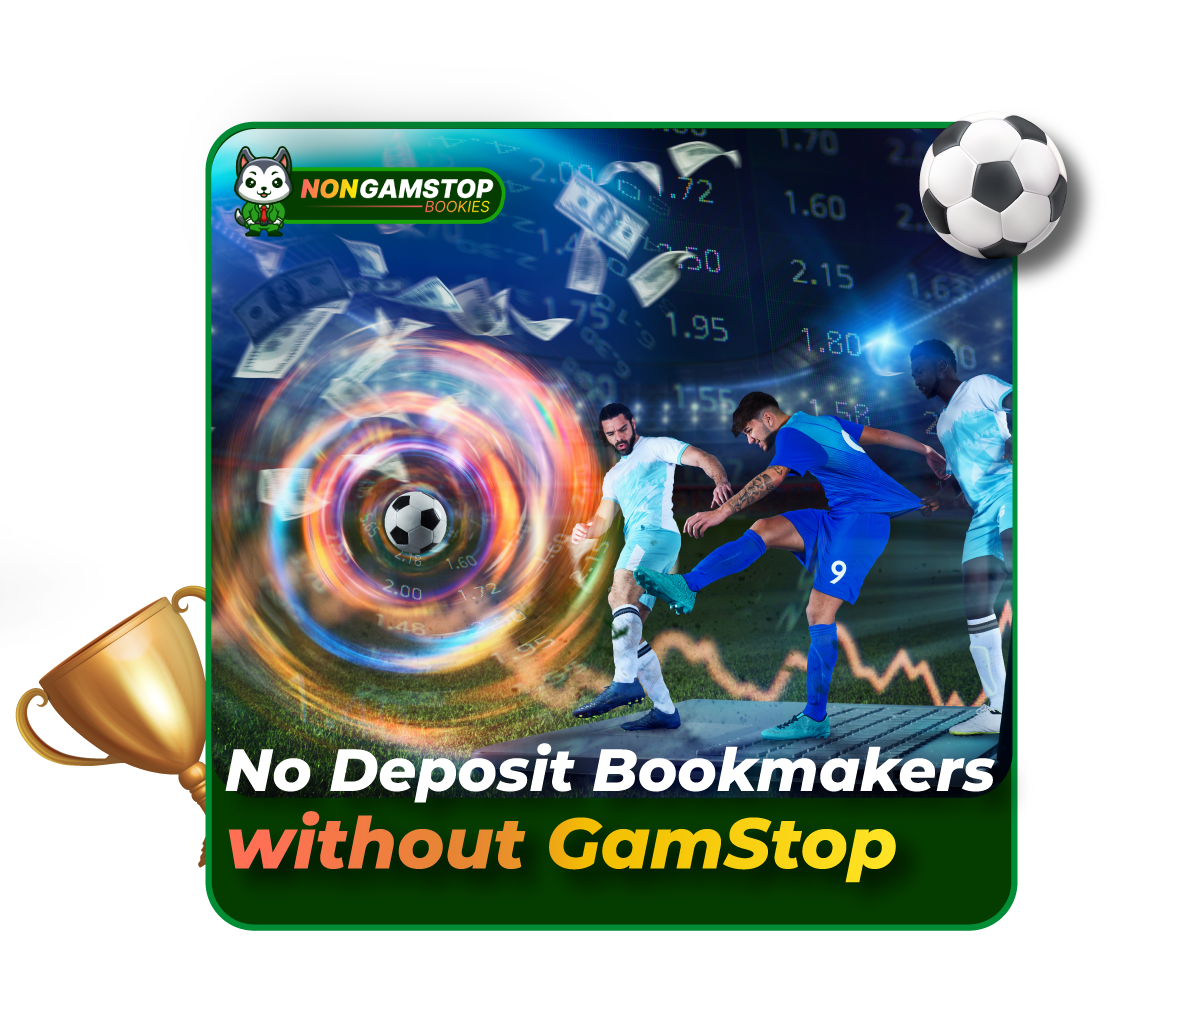 No Deposit Bookmakers without GamStop